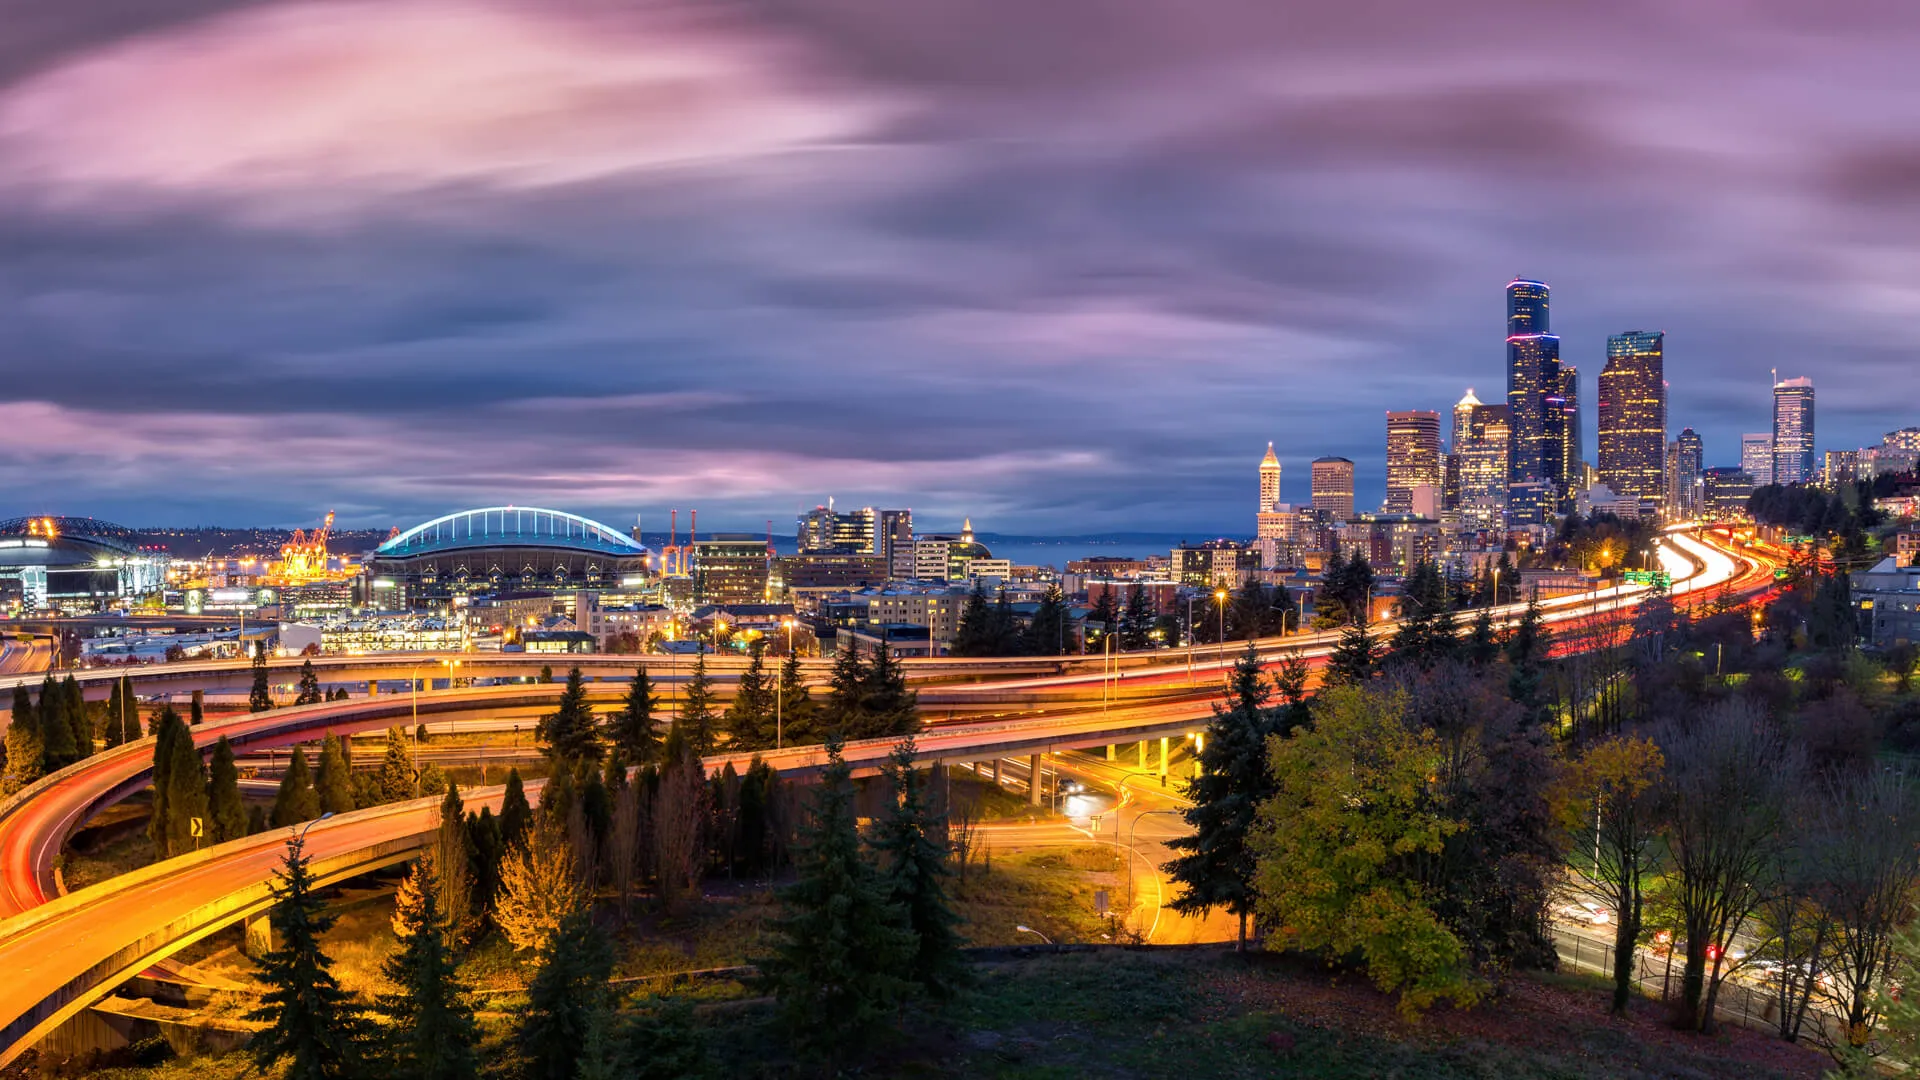 Seattle cityscape at dusk with skyscrapers, winding highways parks and sports arenas under a dramatic sky.